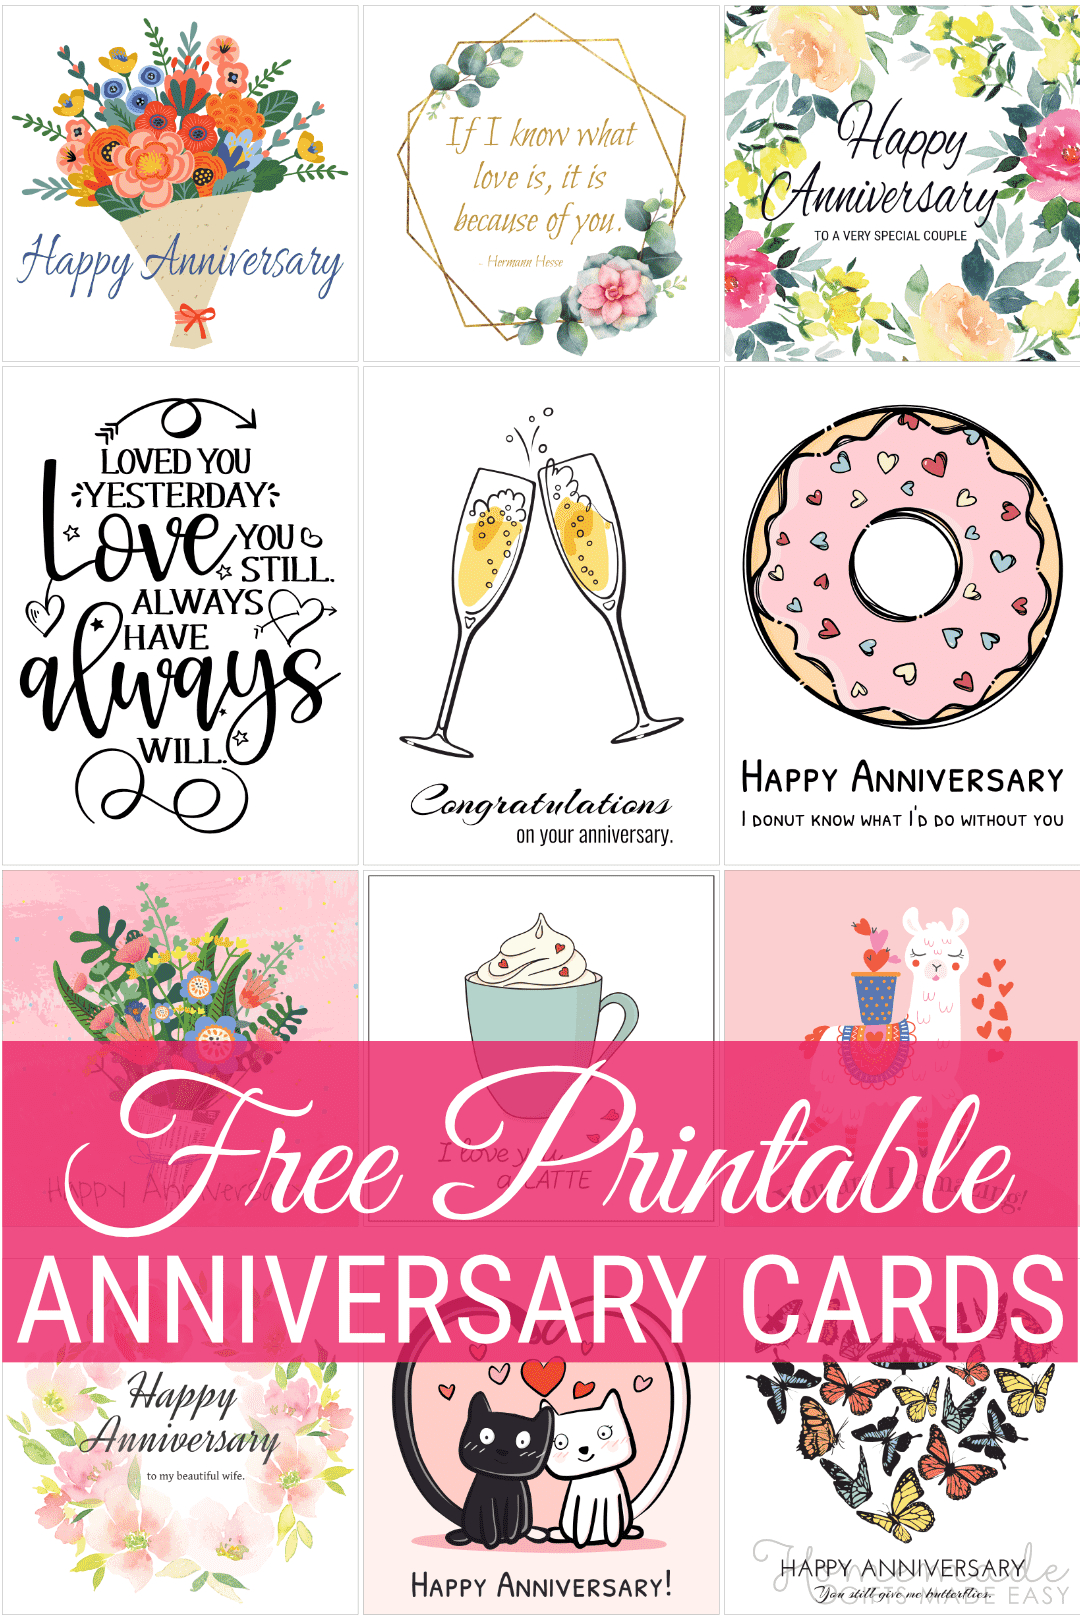 Free Printable Anniversary Cards intended for Free Printable Anniversary Cards